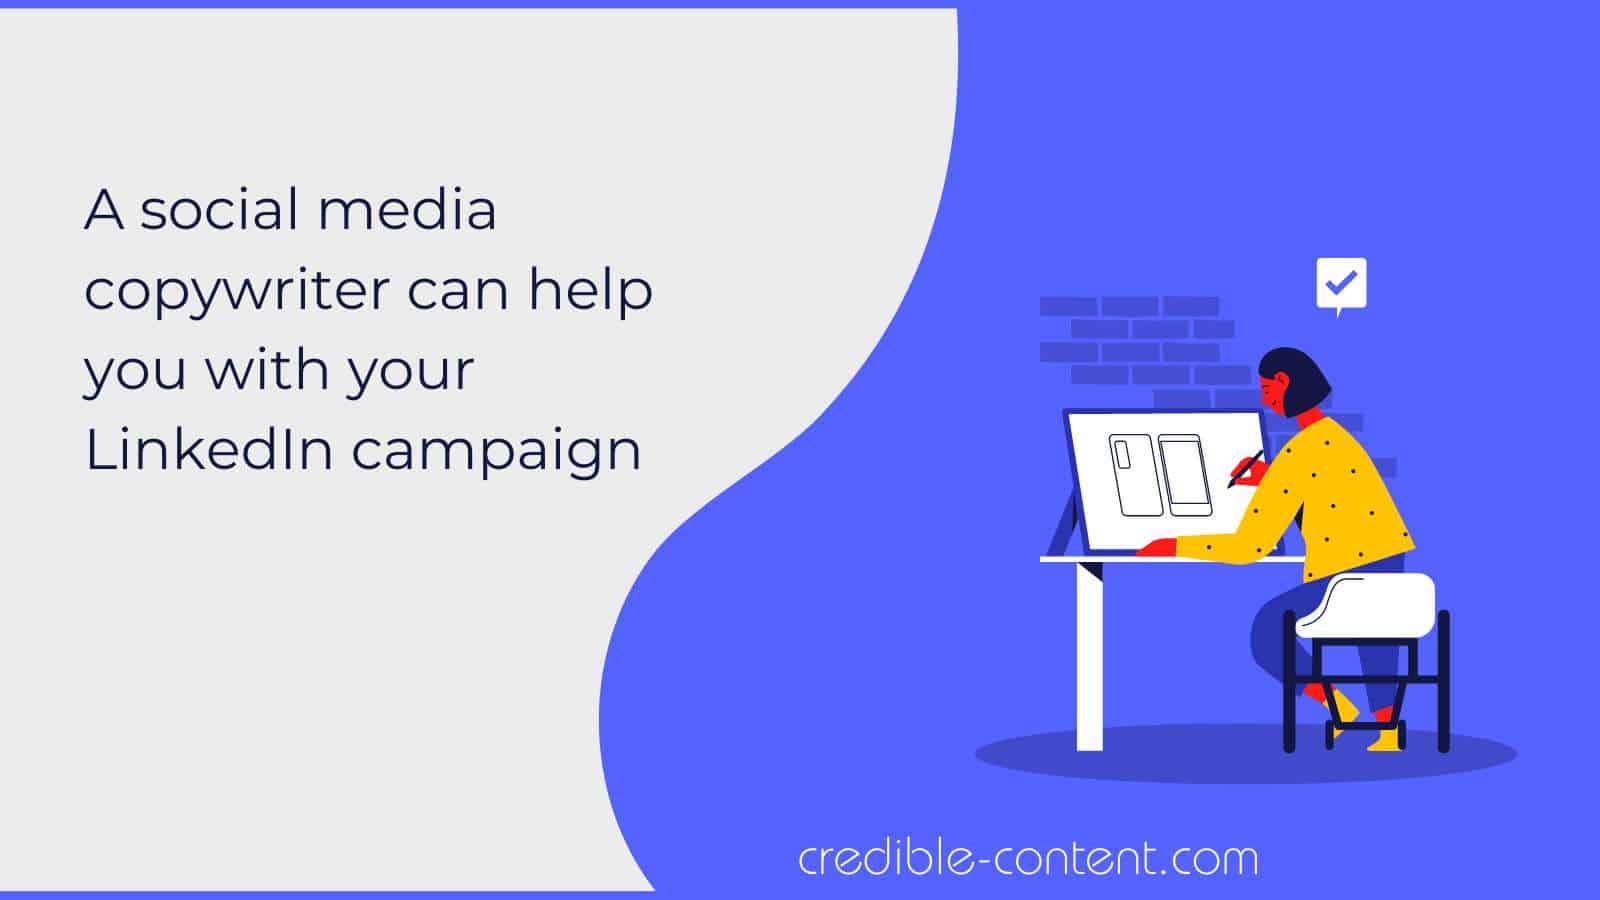 A social media copywriter can help you with your LinkedIn campaign